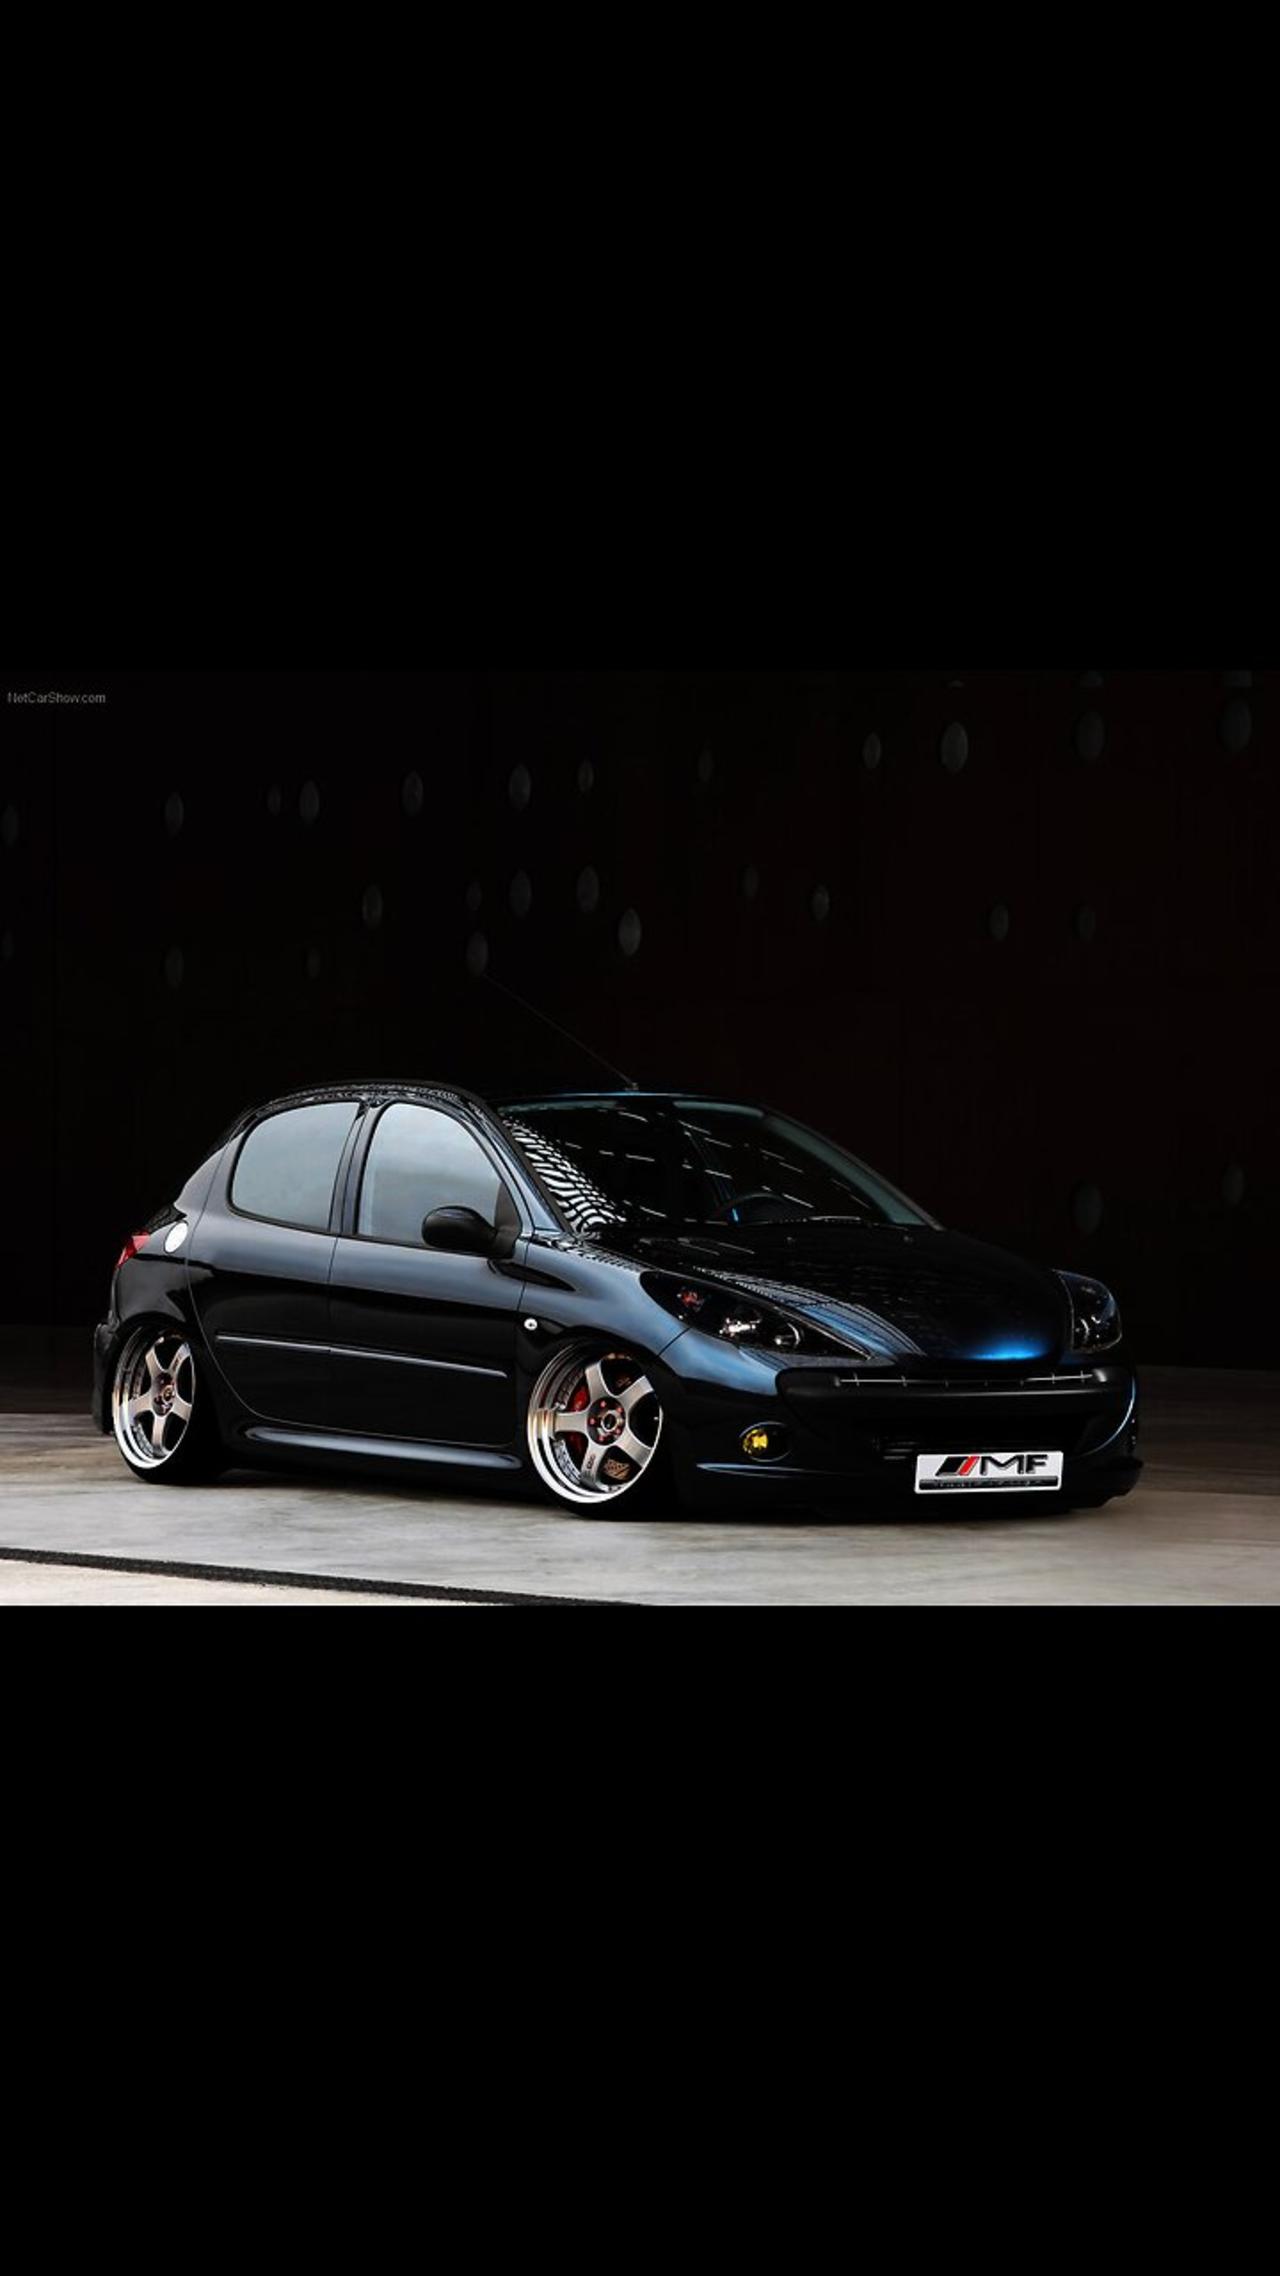 "My Own Peugeot 206: Exploring the Coolest and Most Captivating Features"